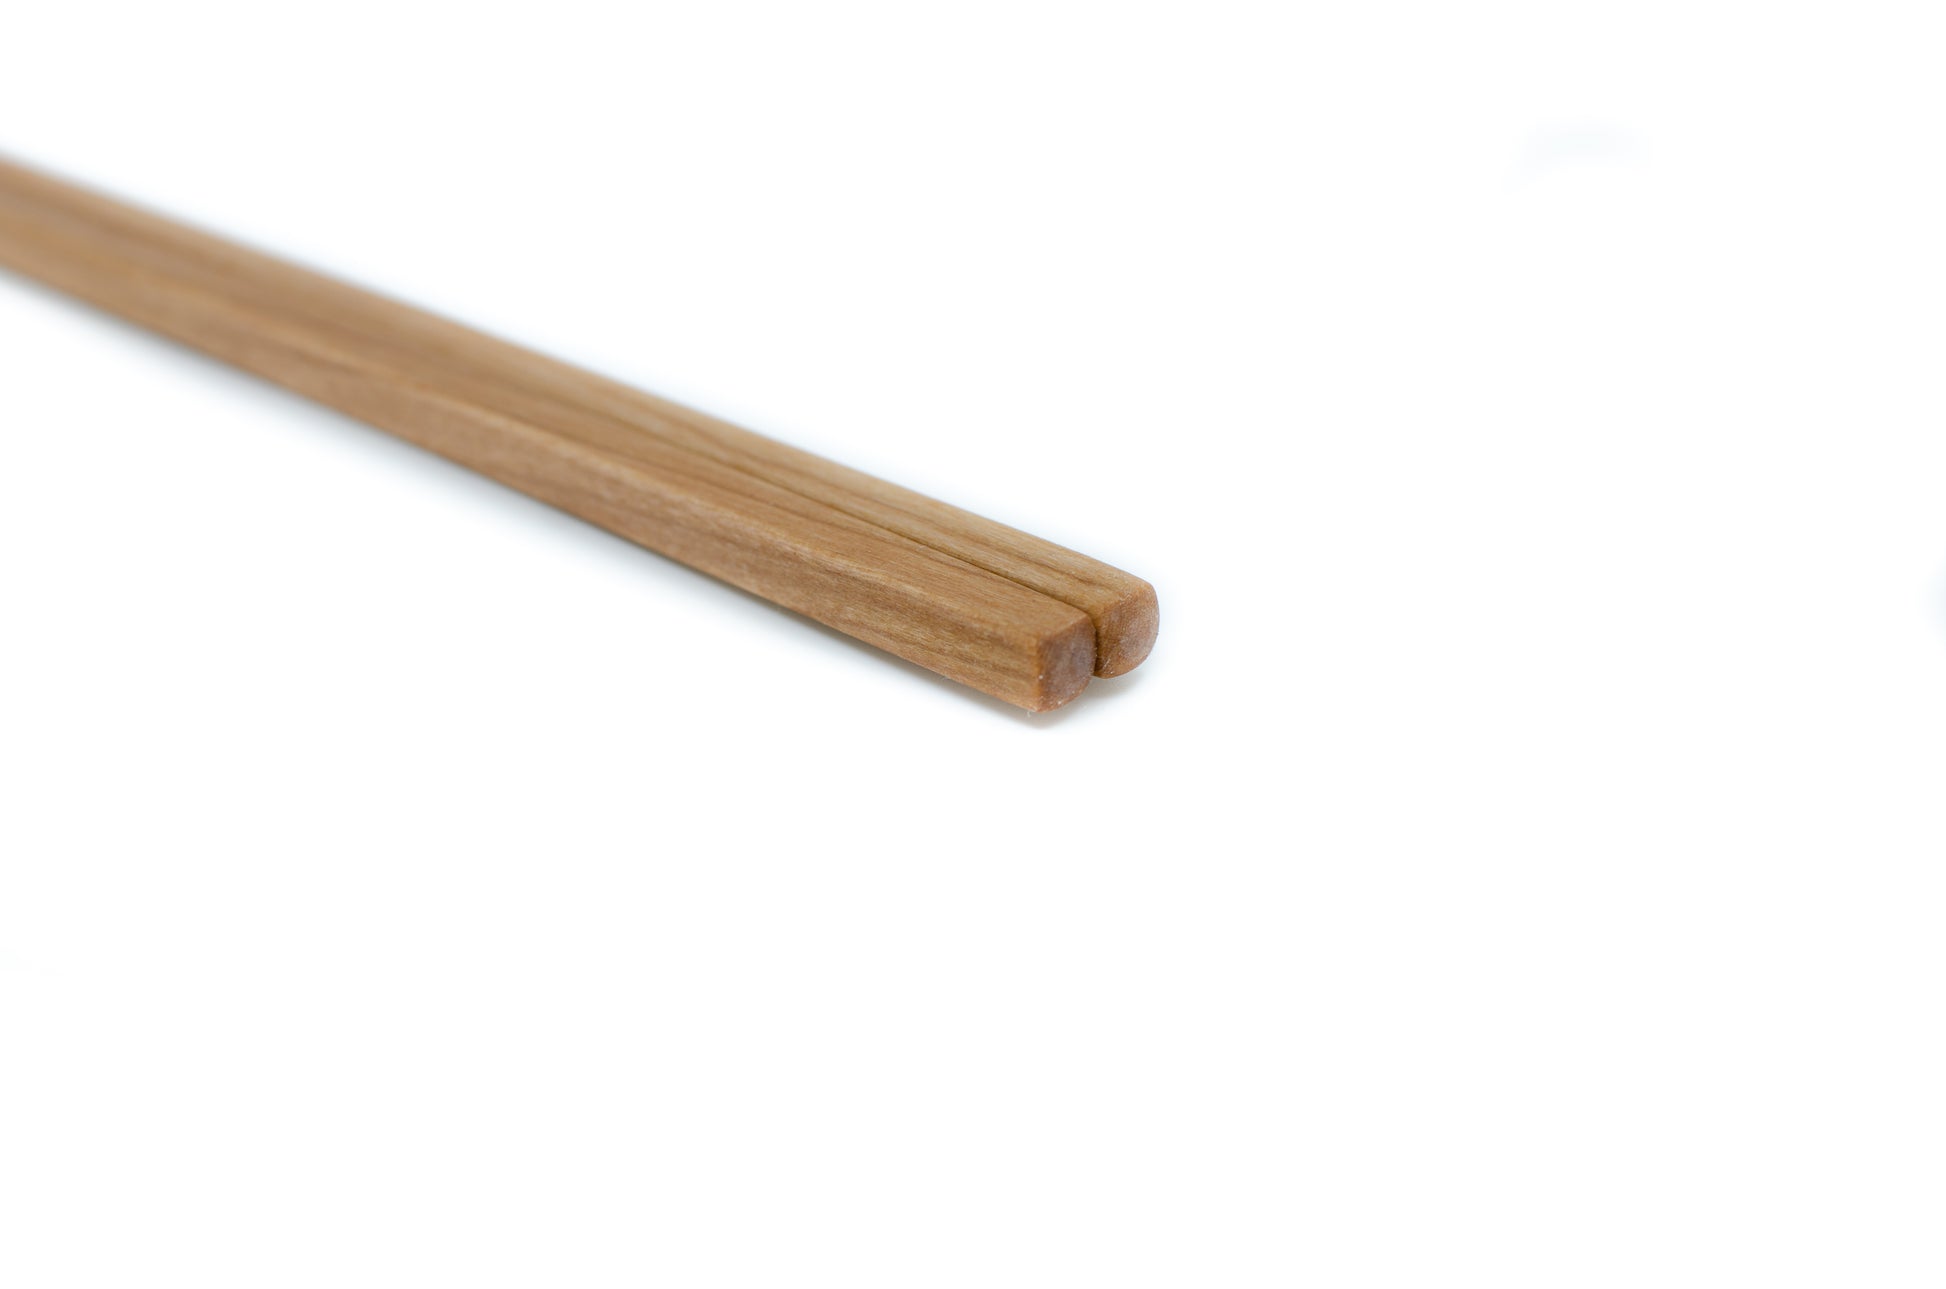 Simpo Square-Pointy style (100% Tung oil finish)-Natural Wood Chopsticks-Made in Canada - Cherry